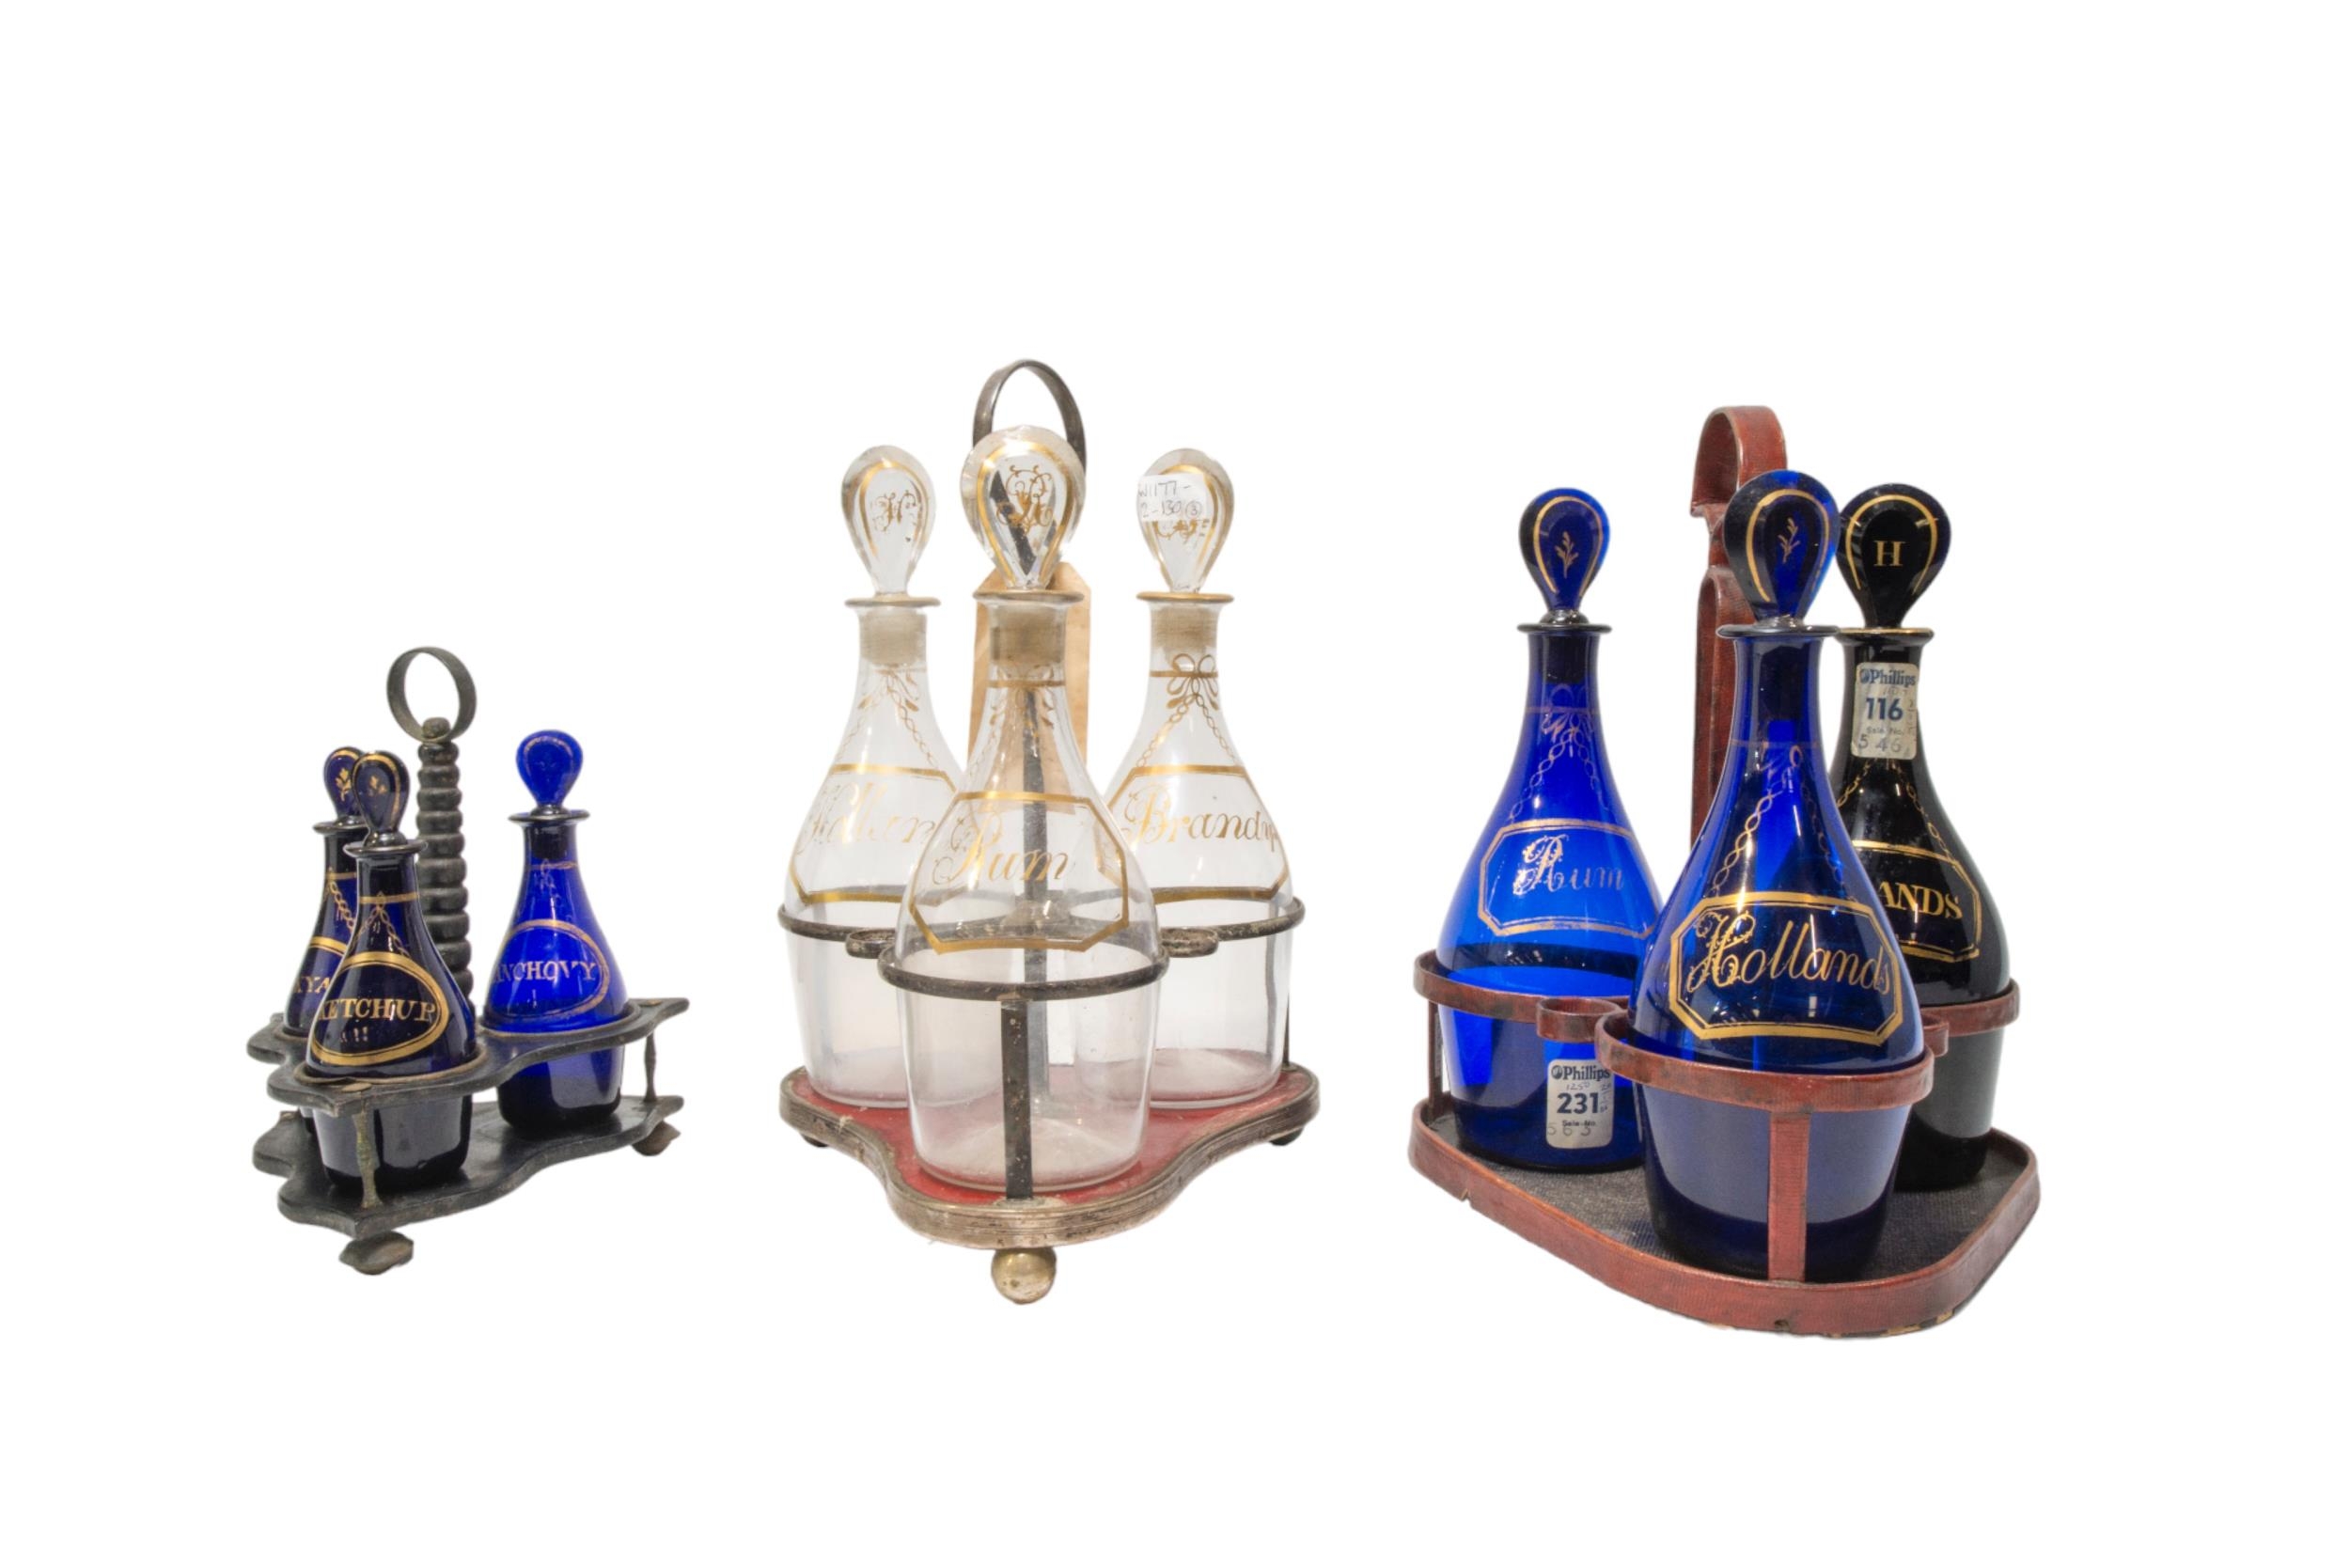 A NEAR MATCHED TRIO OF BRISTOL BLUE DECANTERS, LATE 18TH / EARLY 19TH CENTURY, the gilt painted